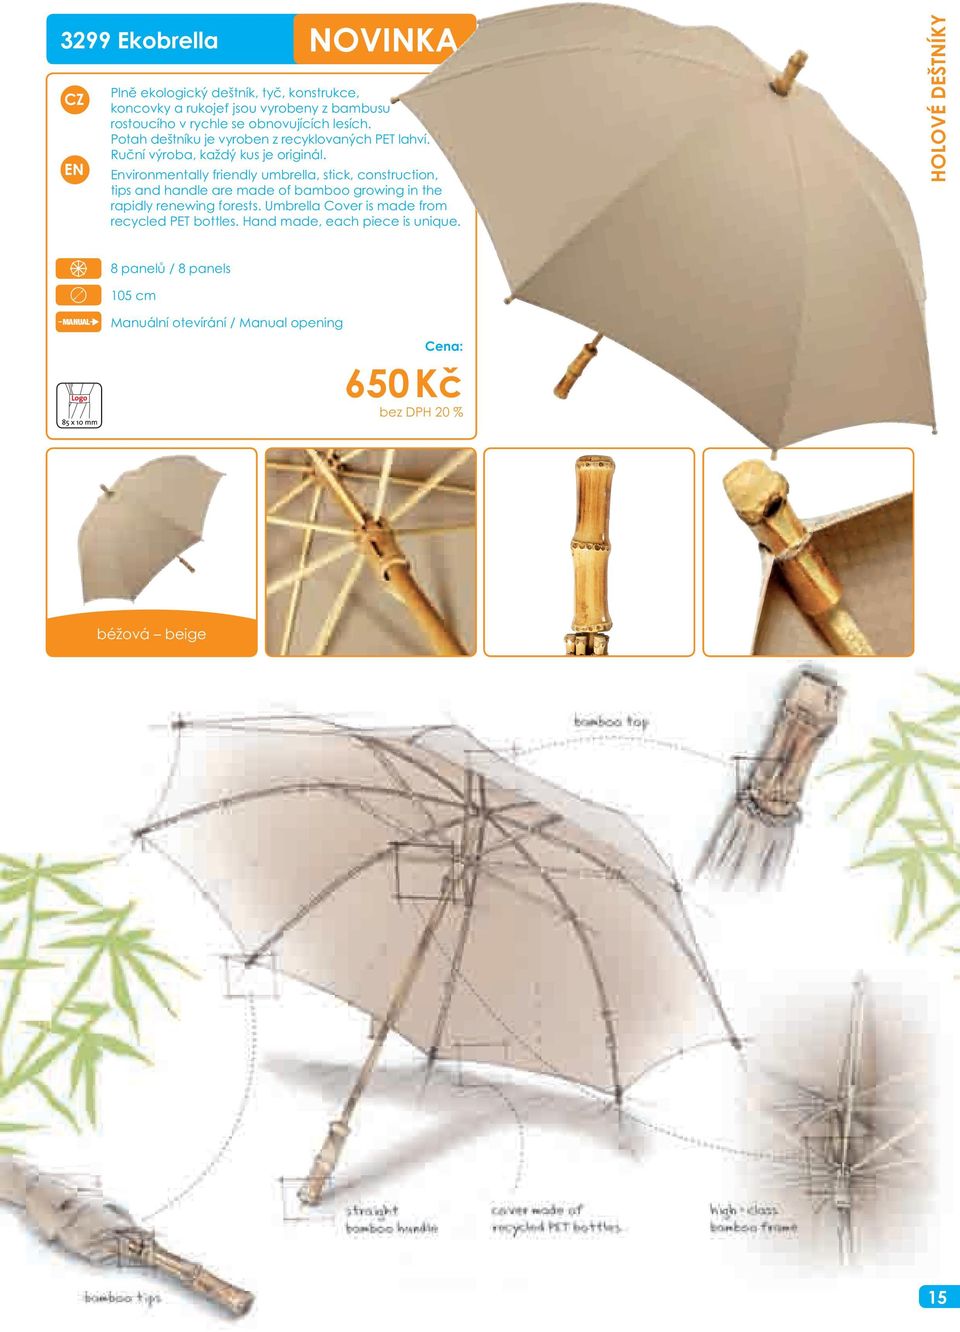 Environmentally friendly umbrella, stick, construction, tips and handle are made of bamboo growing in the rapidly renewing forests.